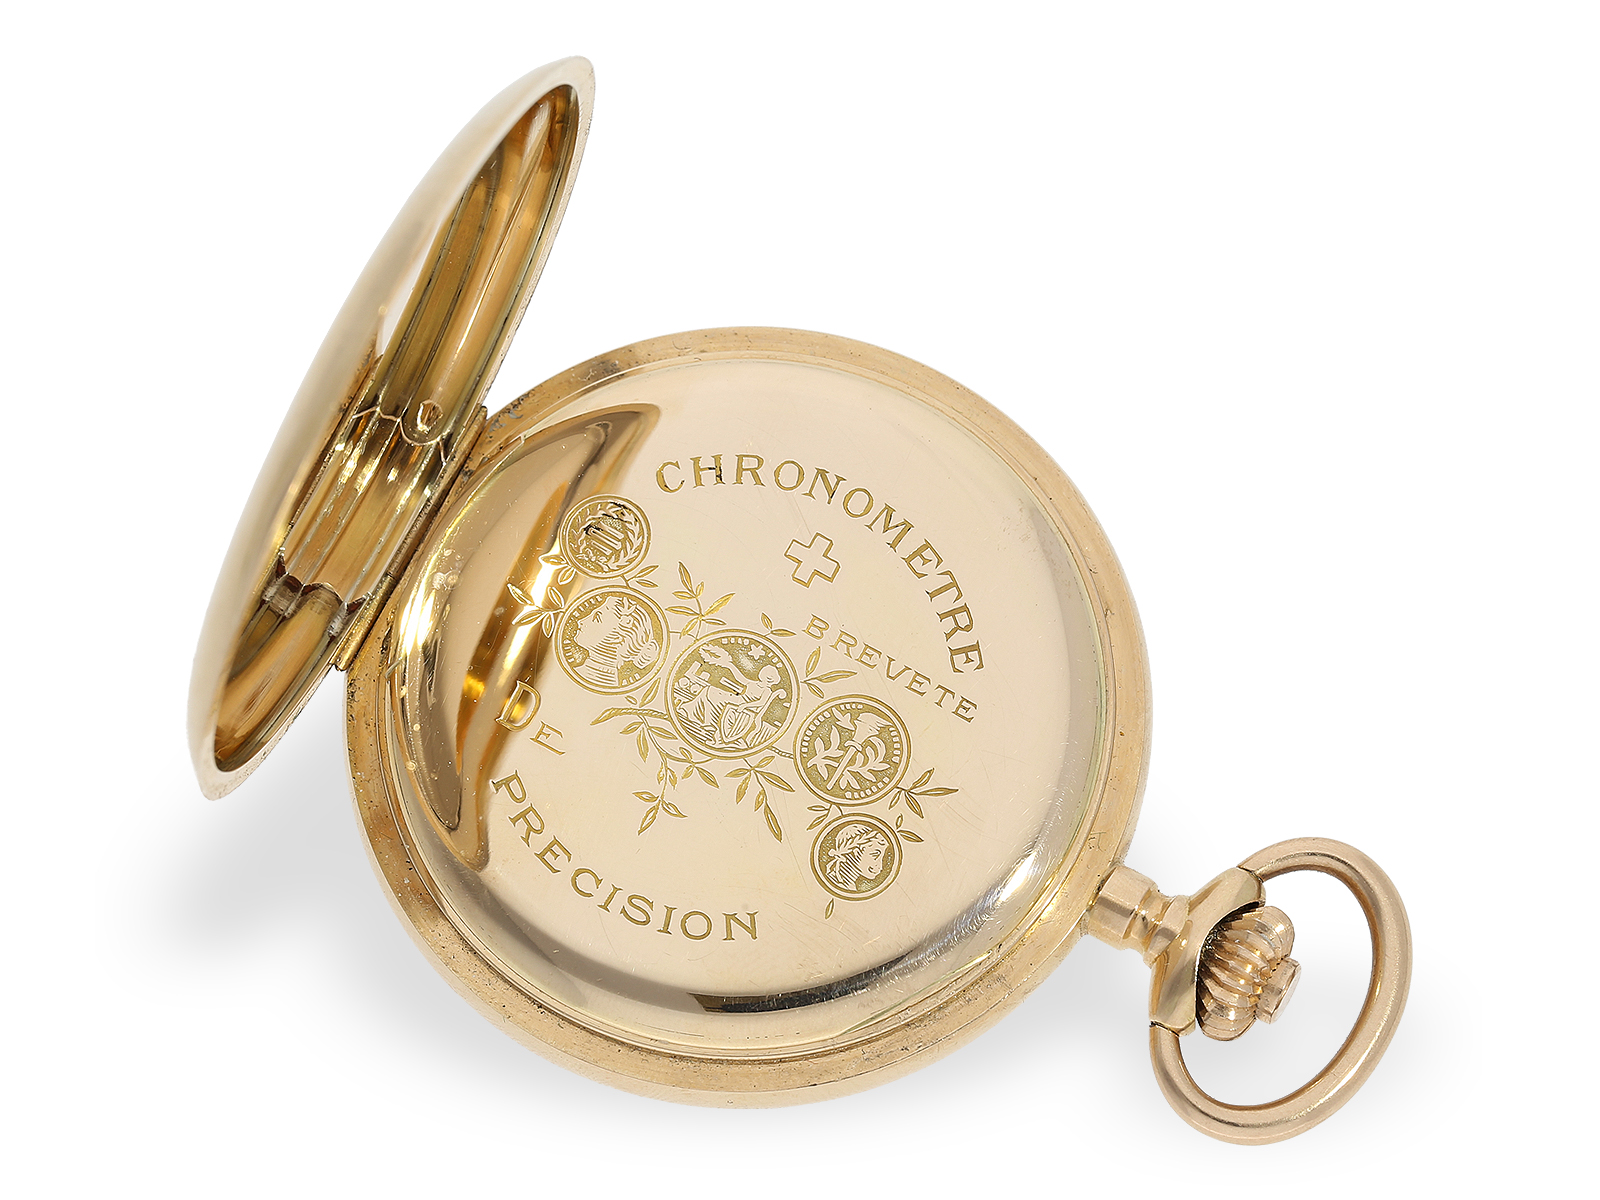 Very fine gold hunting case watch with chronometer escapement, "Chronometre Geneve", ca. 1900 - Image 3 of 8